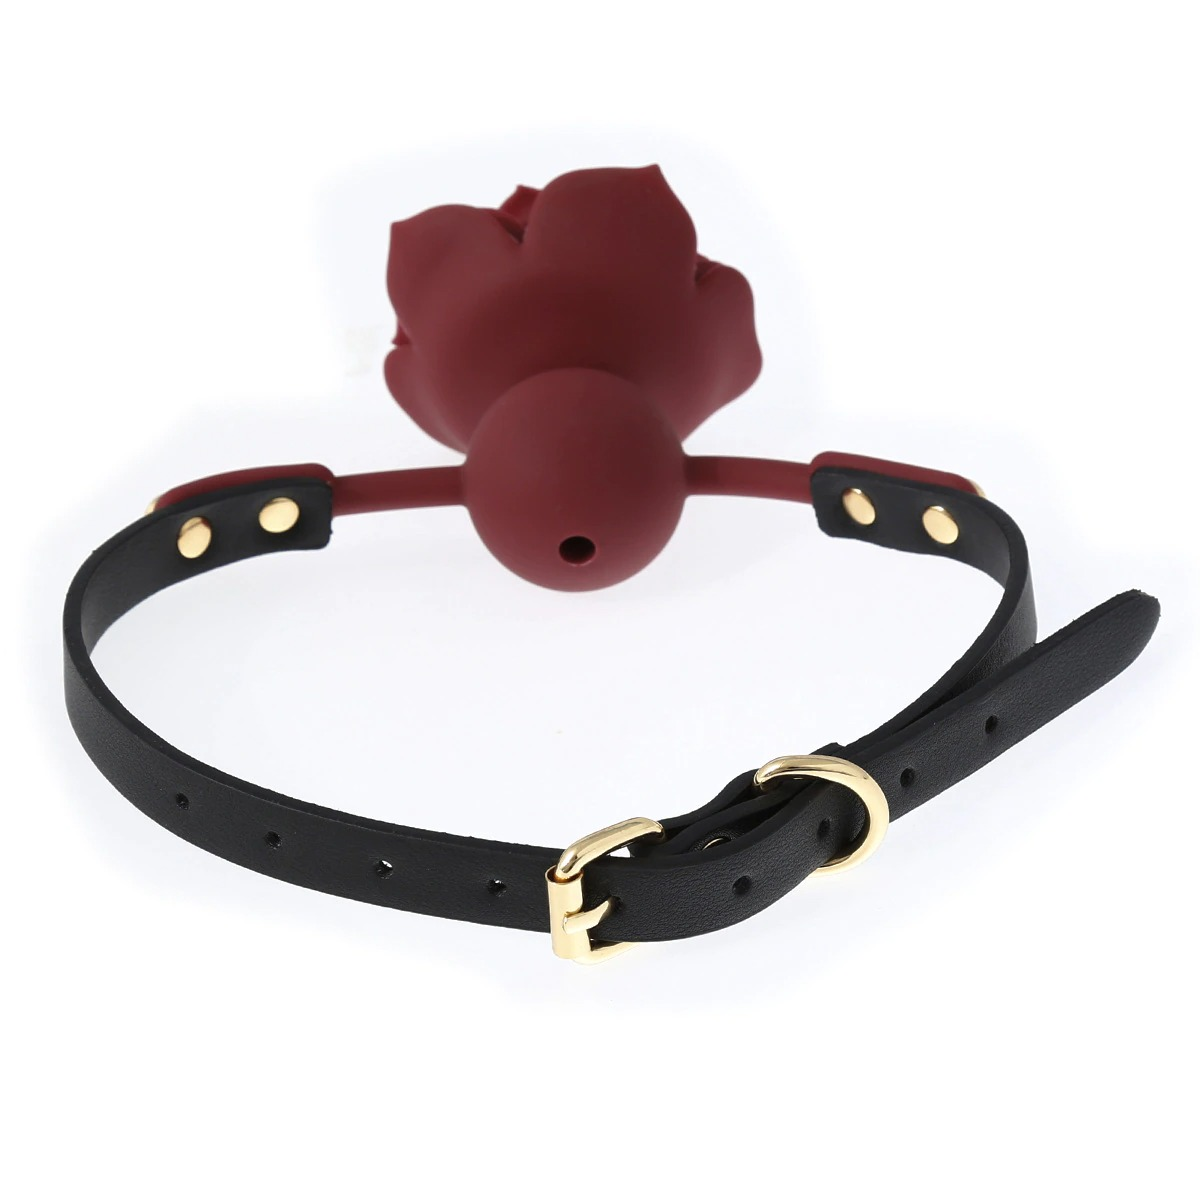 Mouth Silicone Gag for Sex Games / BDSM Bondage for Ladies / Adult Sex Toy for Flirting - EVE's SECRETS